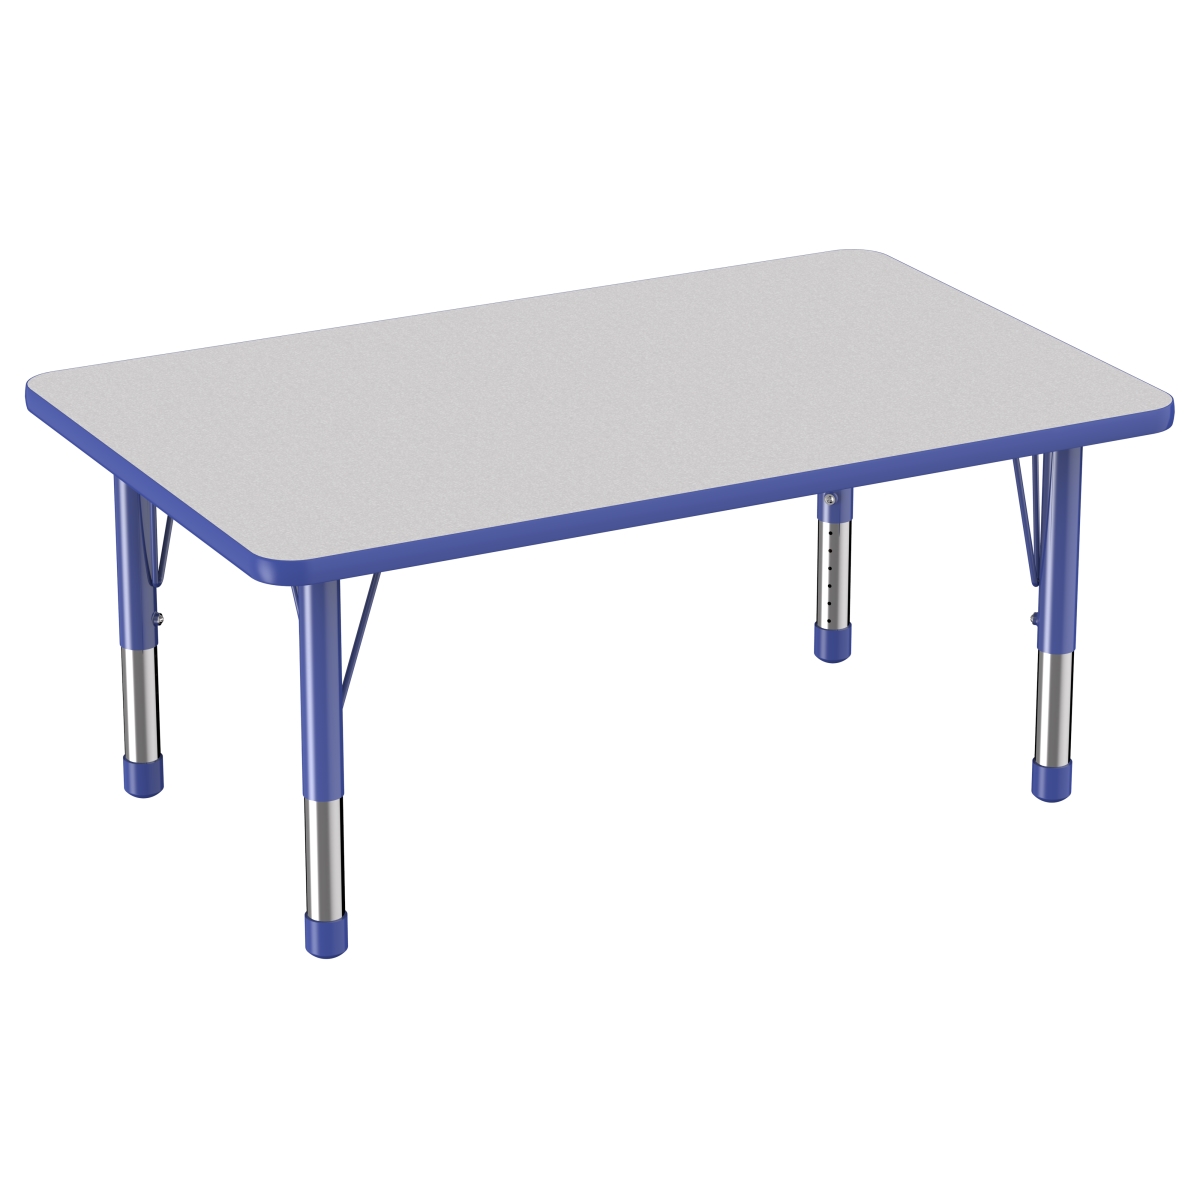 10021-gybl 30 X 48 In. Rectangle T-mold Adjustable Activity Table With Chunky Leg - Grey & Blue